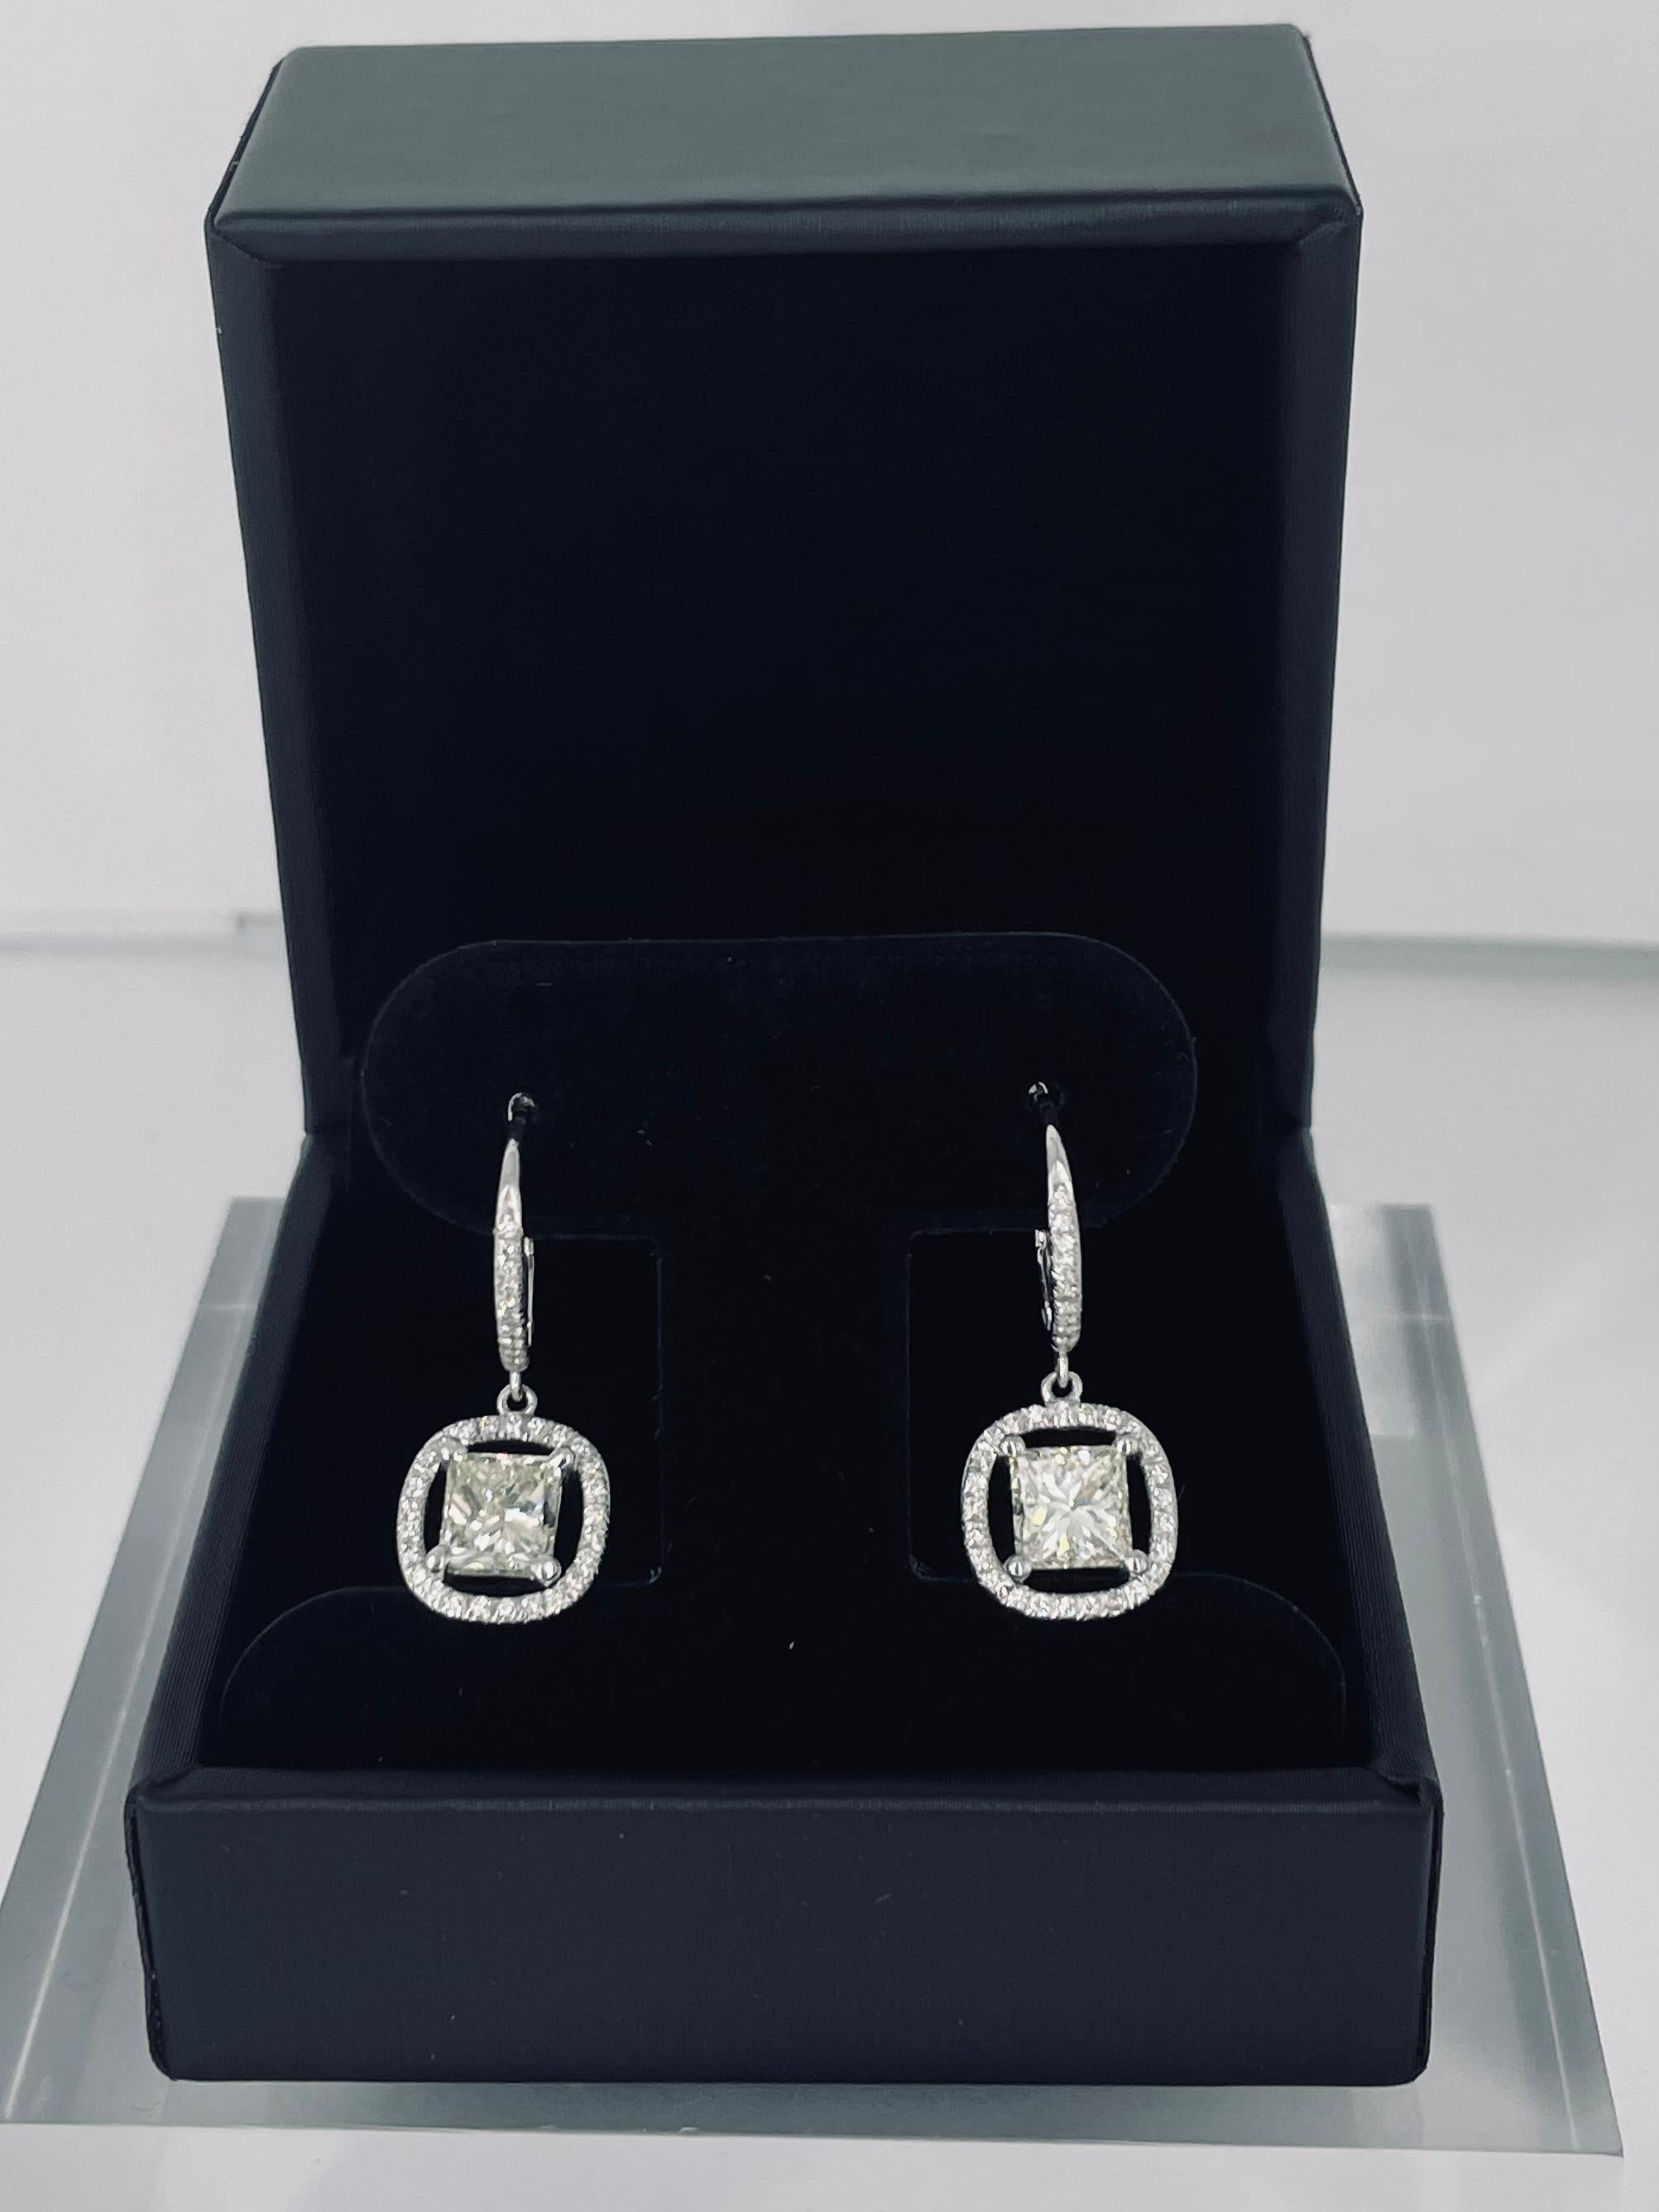 These delicate sparkling earrings by J. Birnbach are a unique take on the everyday diamond earring! A fine border of pave diamonds creates an open frame around the center princess cut diamonds. The lever back style allows for lively movement,